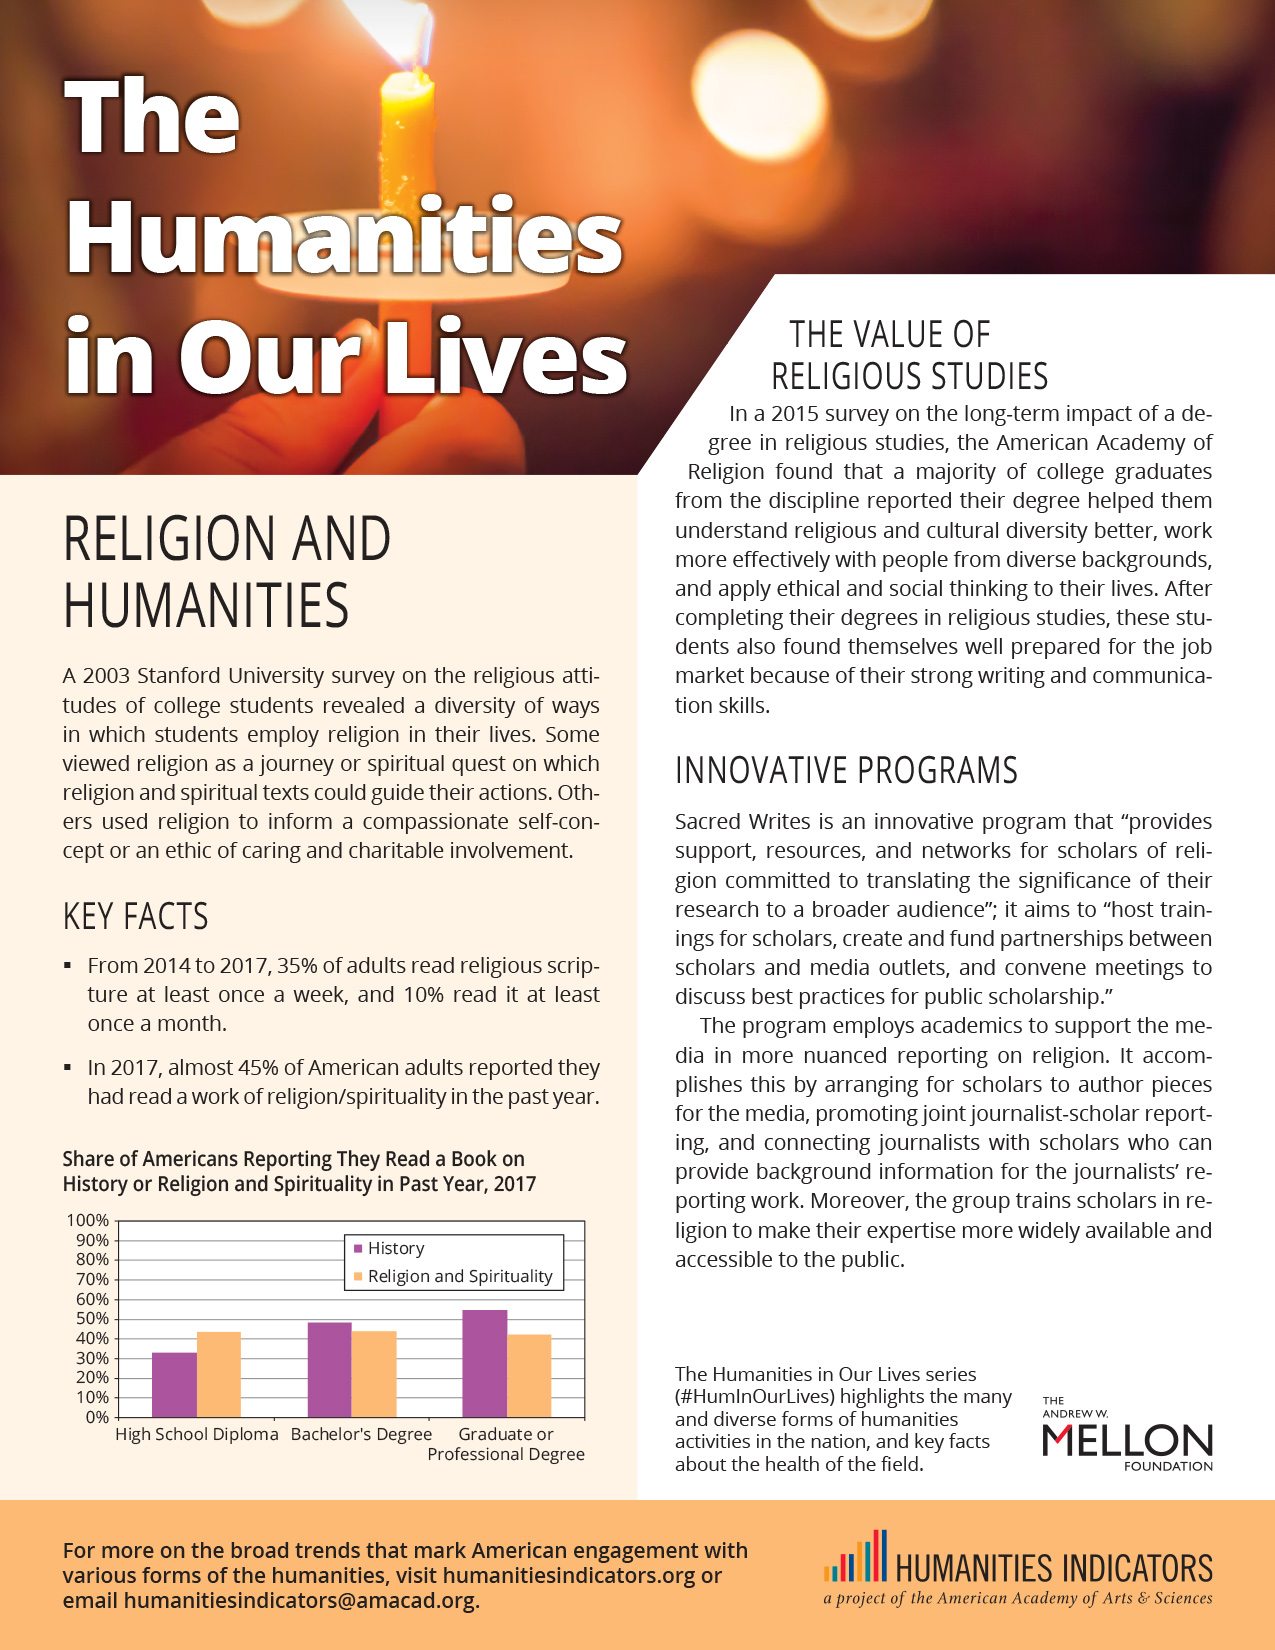 Religion and Humanities